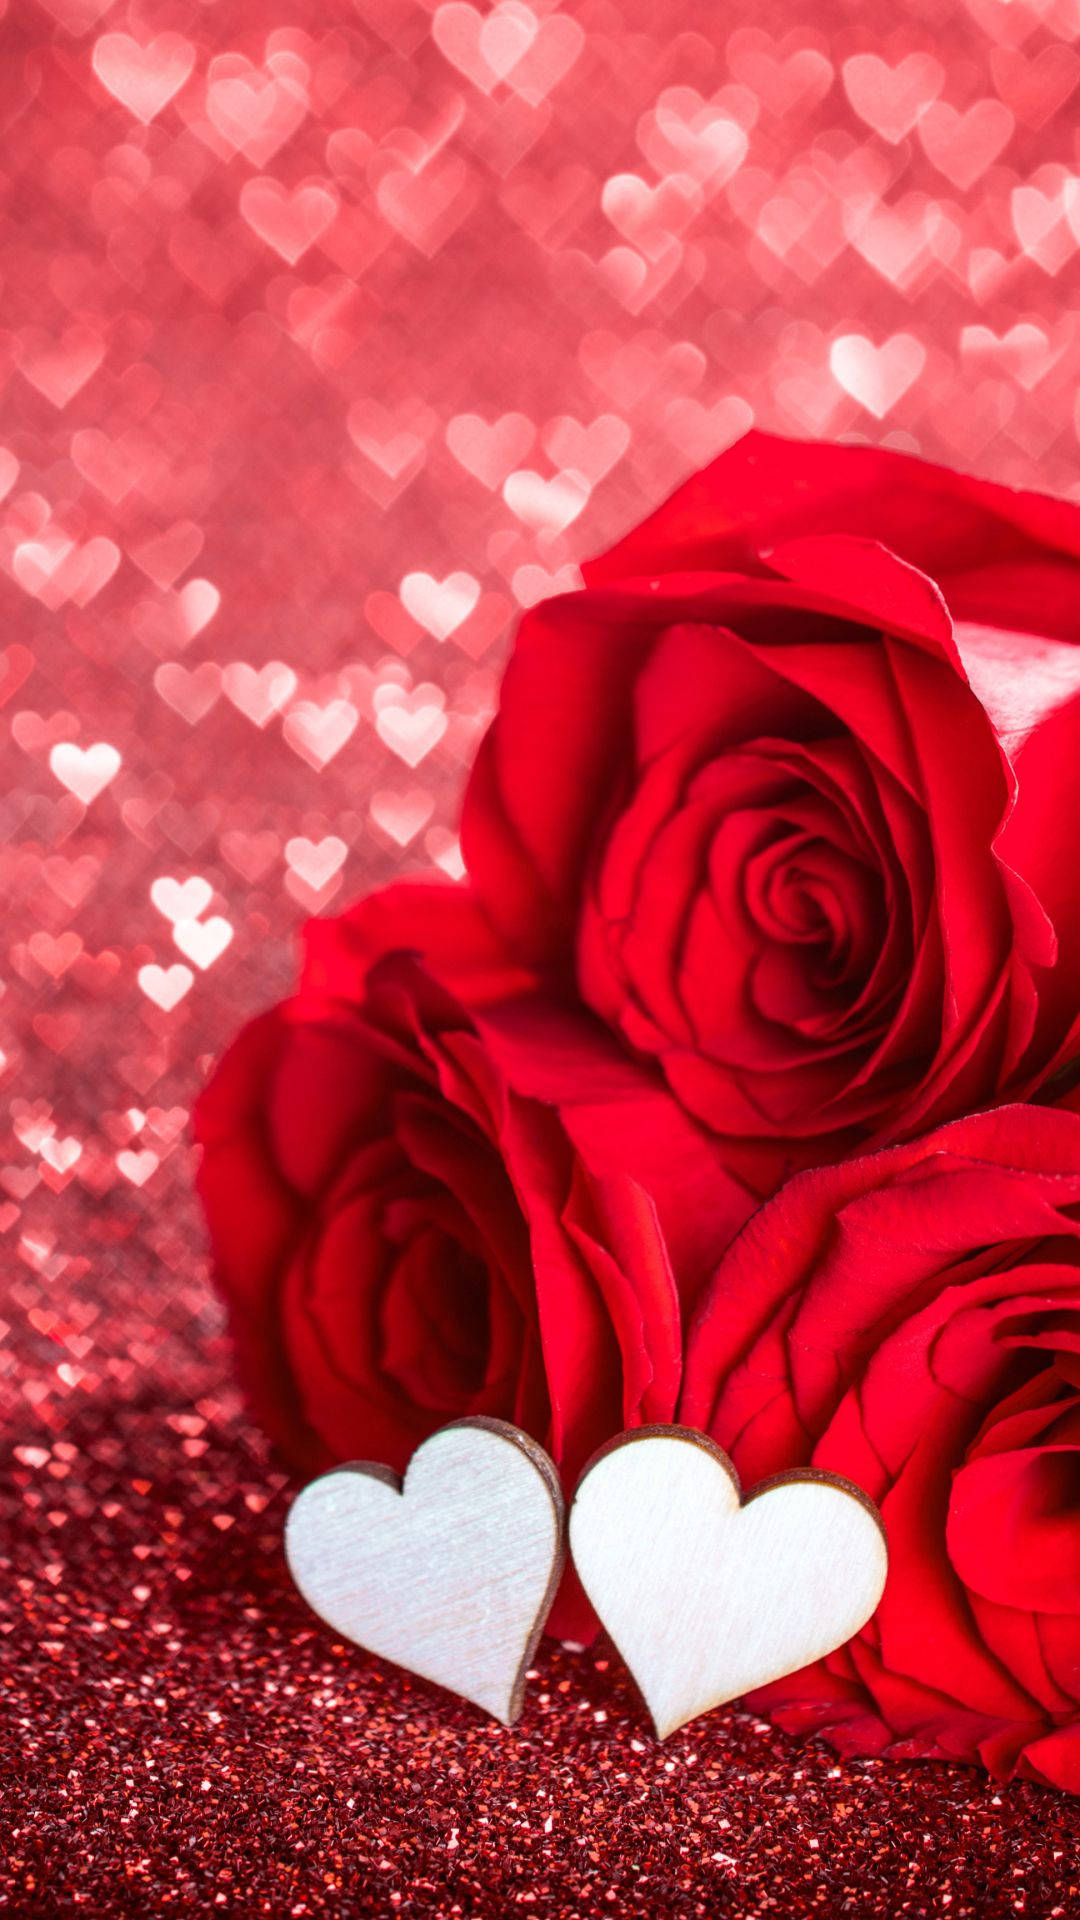 Romantic Rose With White Hearts Background